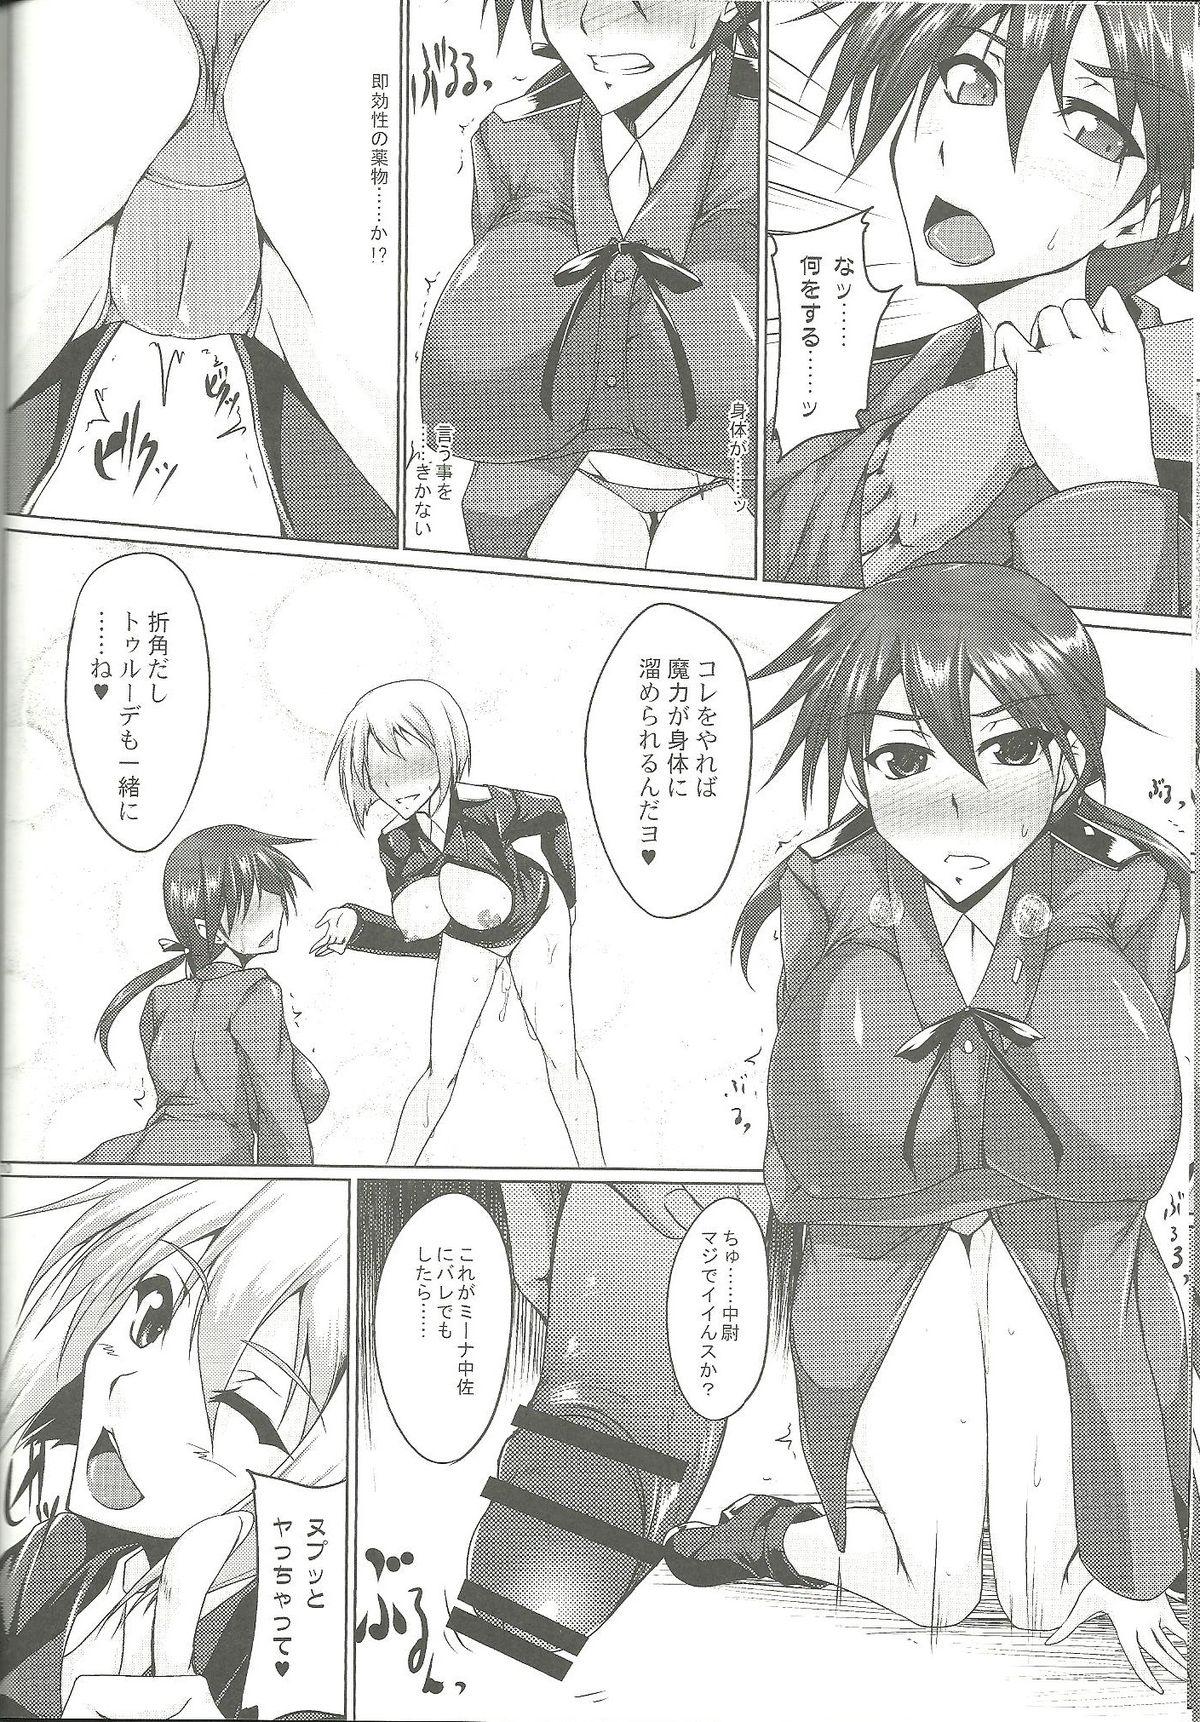 Nalgas Booby Trap - Strike witches Ex Gf - Page 9